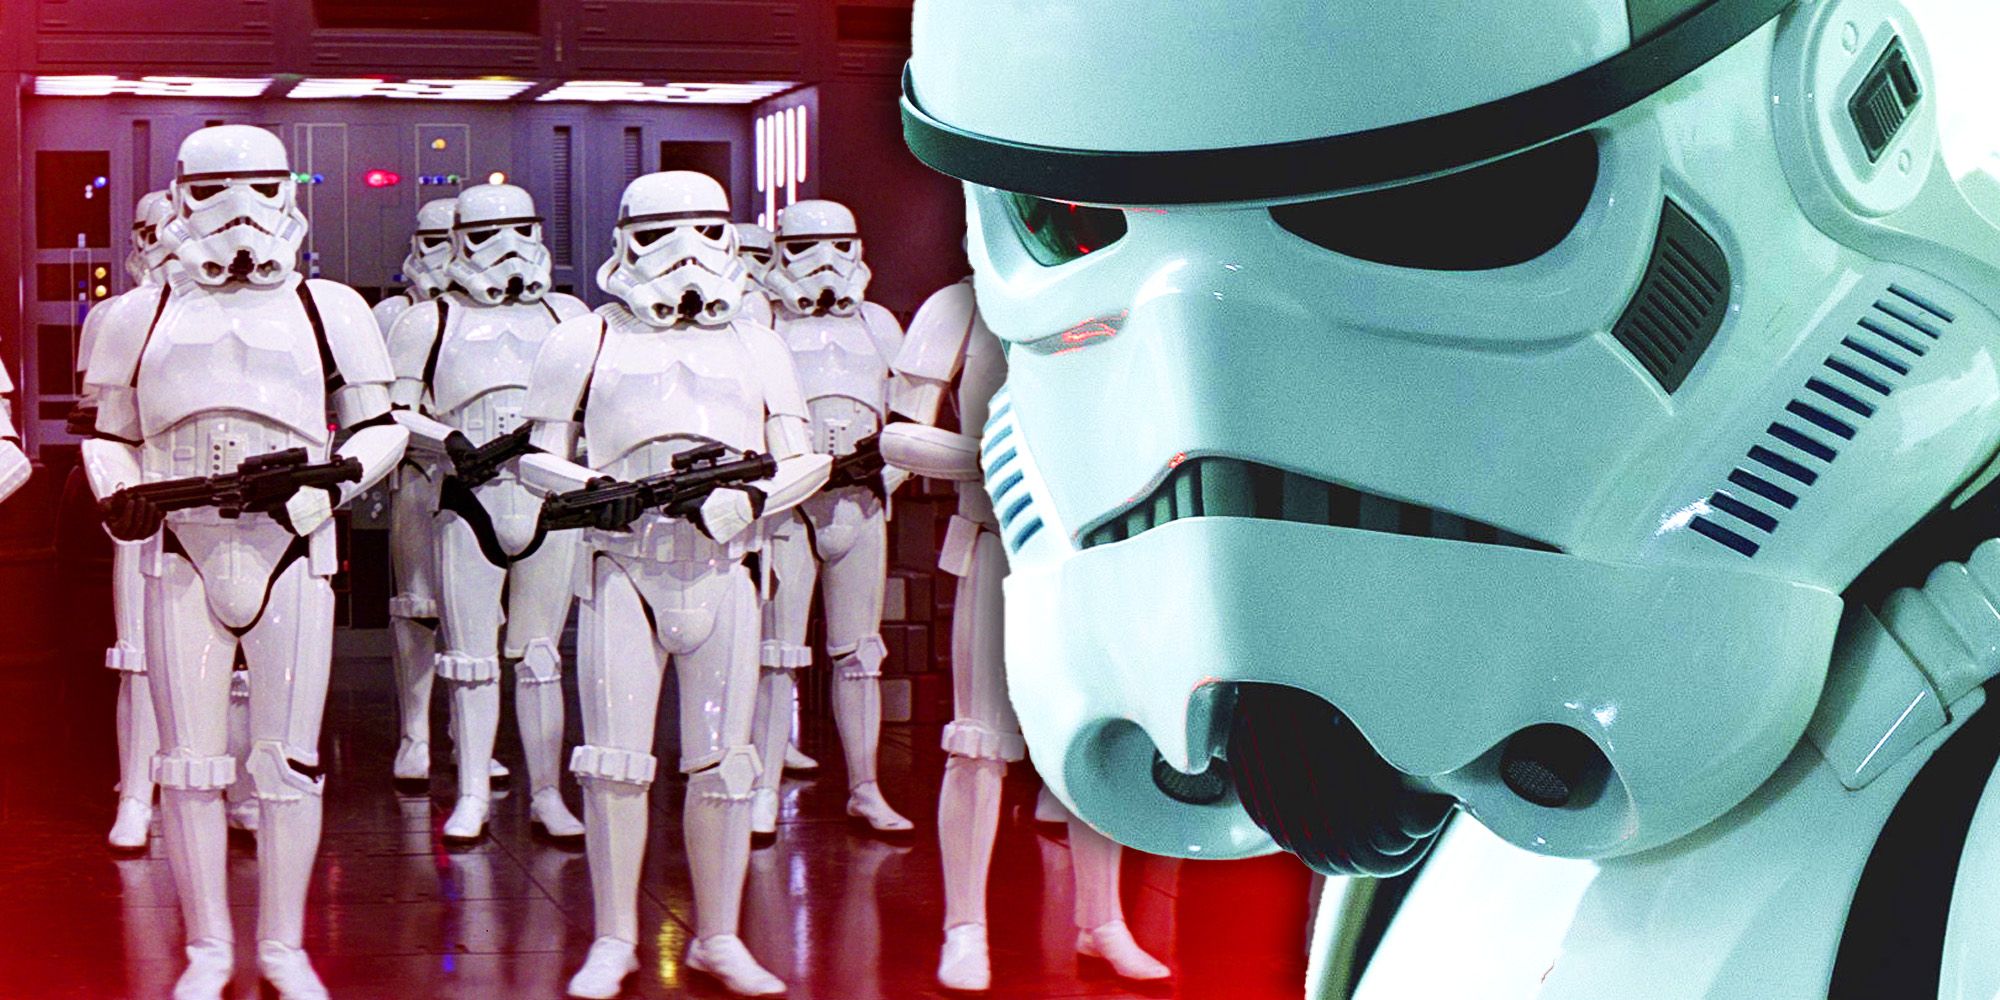 An Imperial stormtrooper faces the camera with a group of stormtroopers standing further behind.